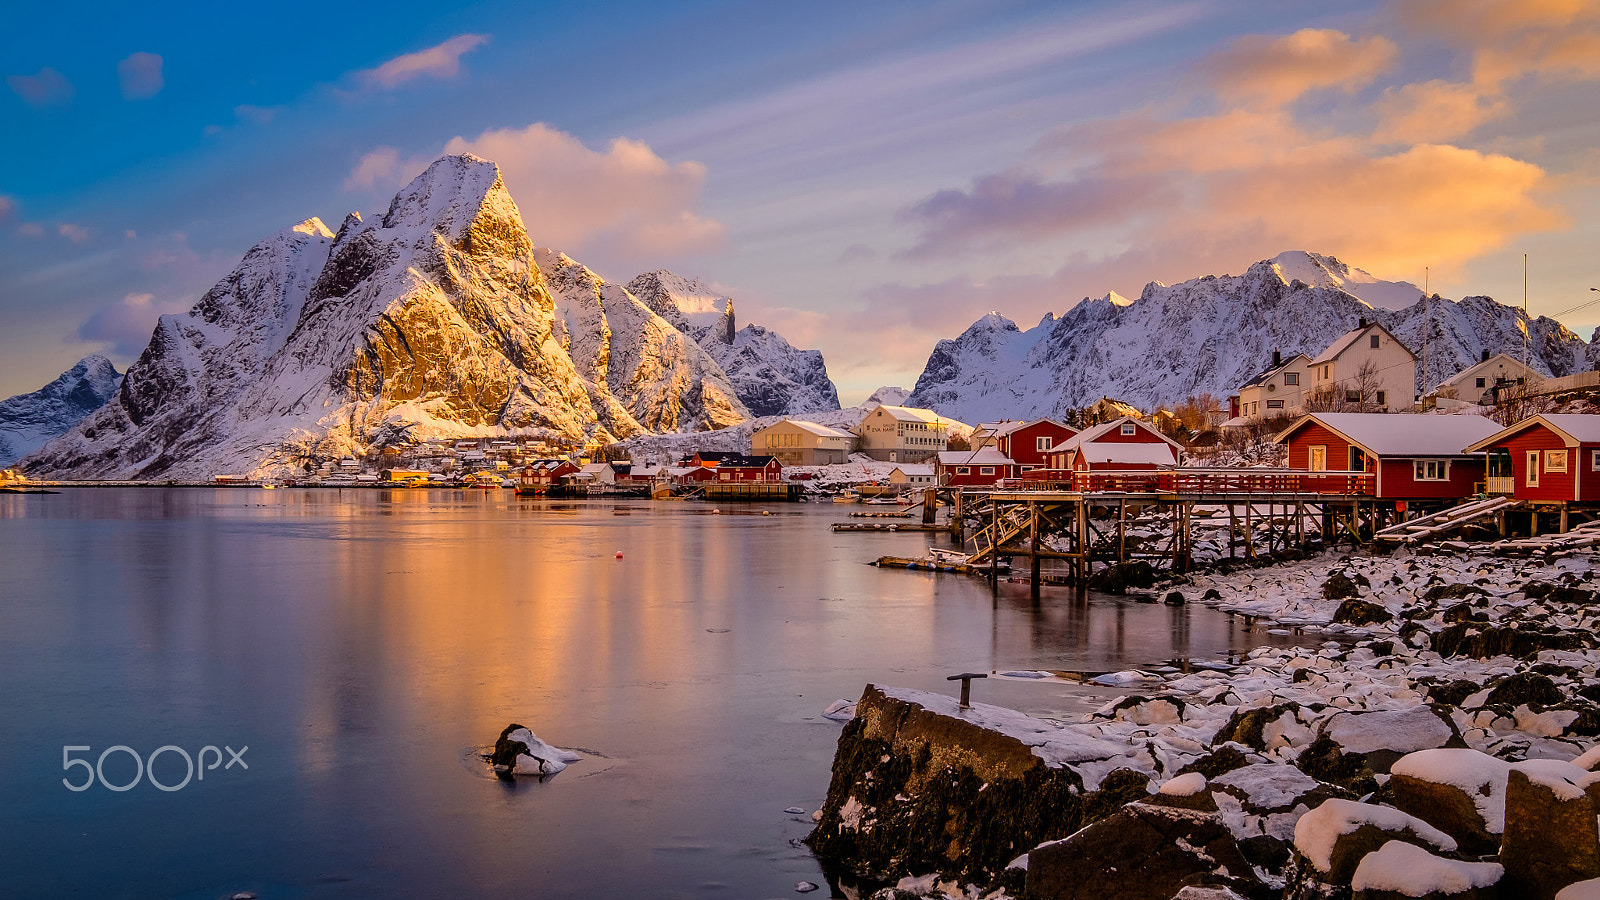 Fujifilm X-T10 sample photo. Early morning at reine photography